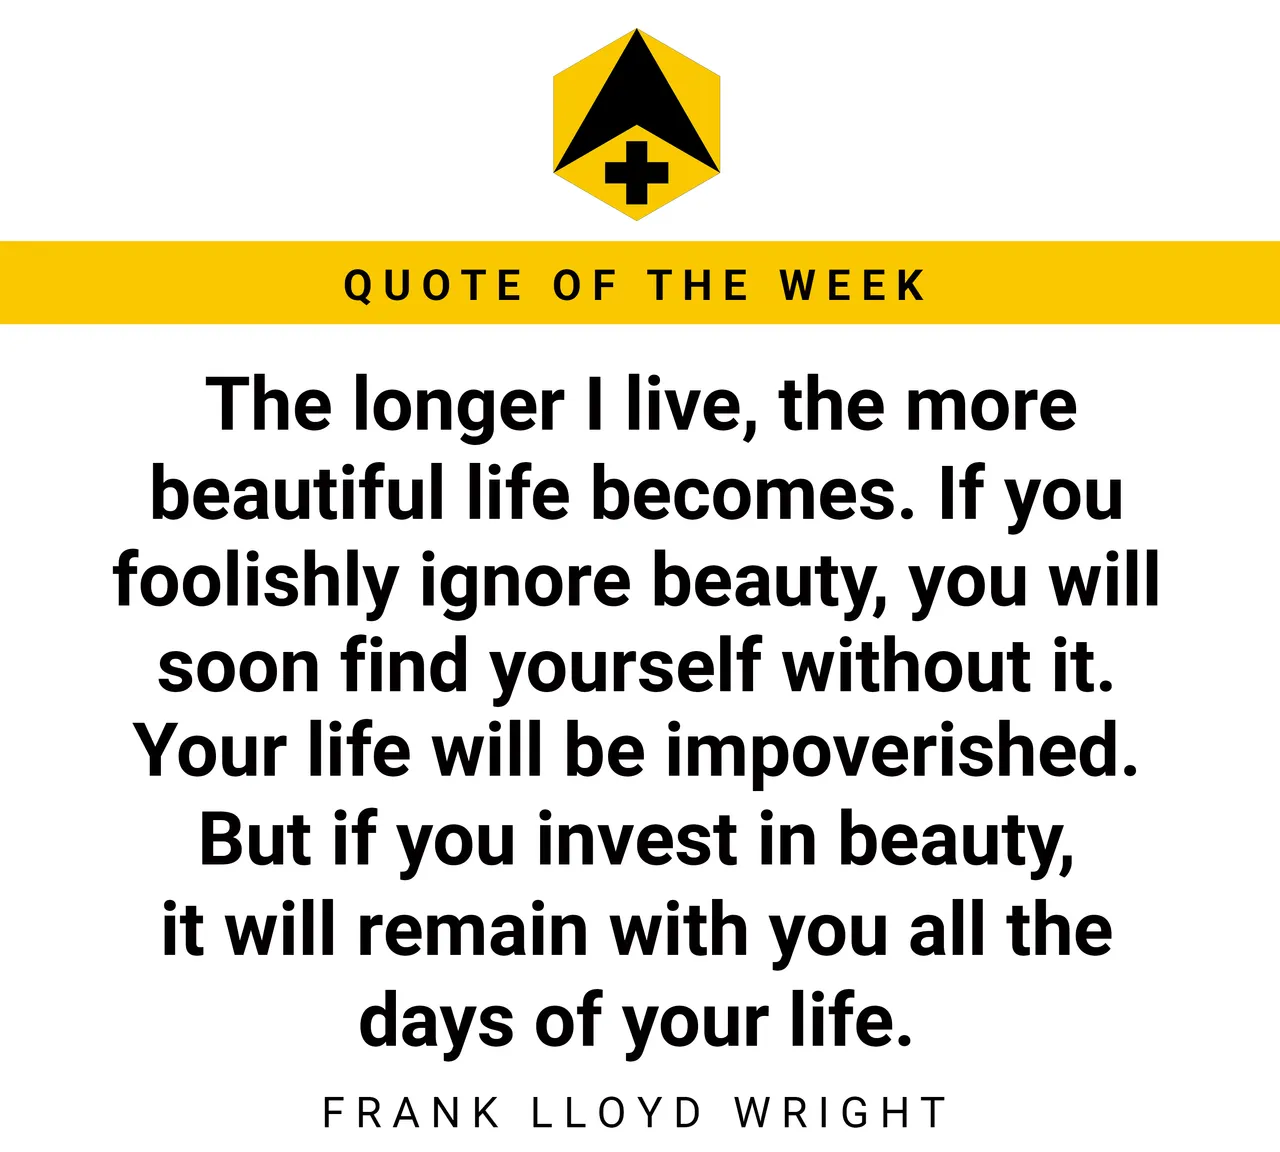 2022-04-25 AB 64 QUOTE OF THE WEEK.png